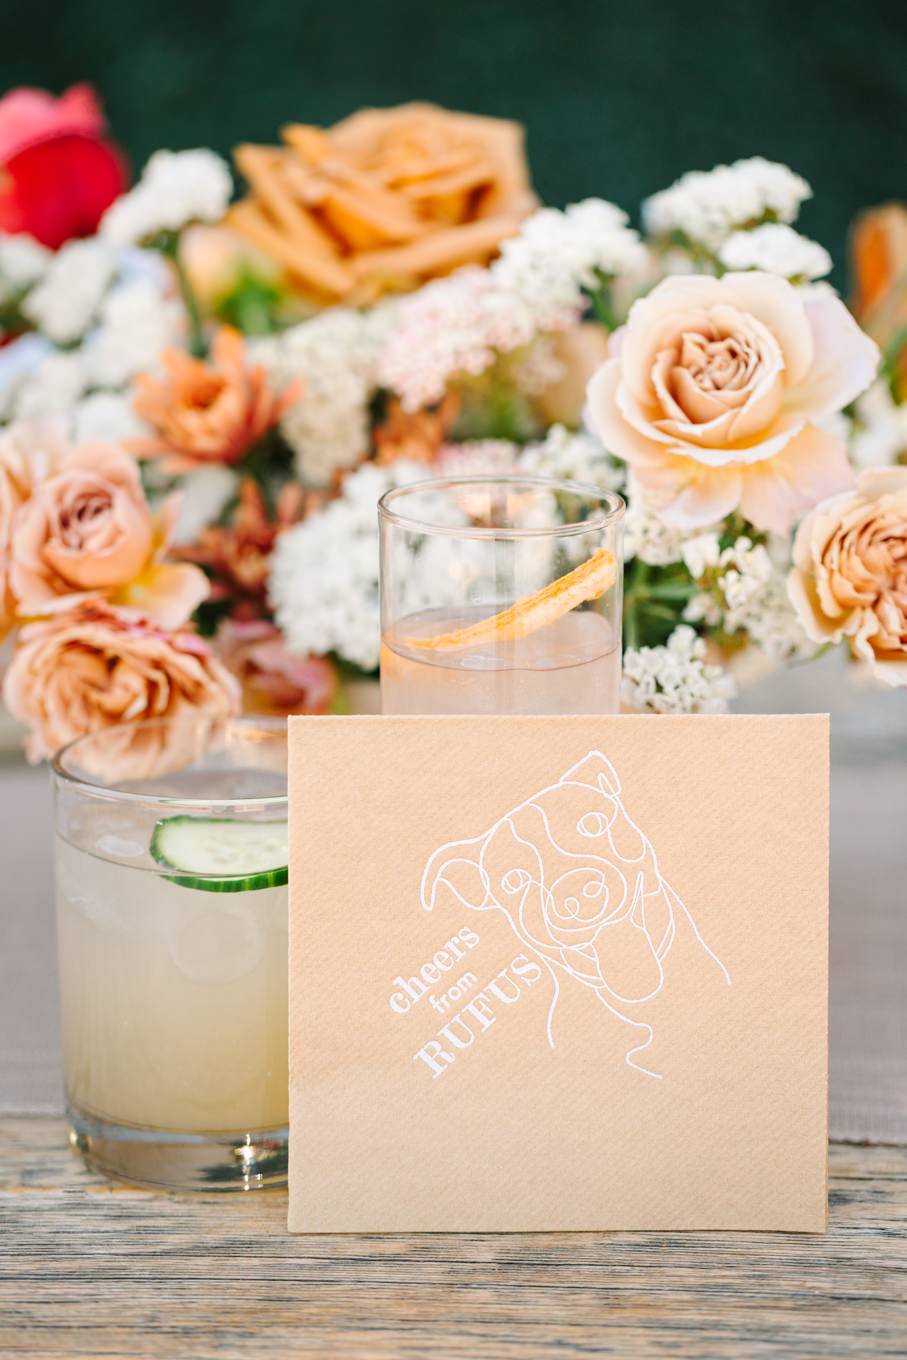 Custom napkins with bride and groom's dog | Pink and orange Lautner Compound wedding | Colorful Palm Springs wedding photography | #palmspringsphotographer #palmspringswedding #lautnercompound #southerncaliforniawedding  Source: Mary Costa Photography | Los Angeles